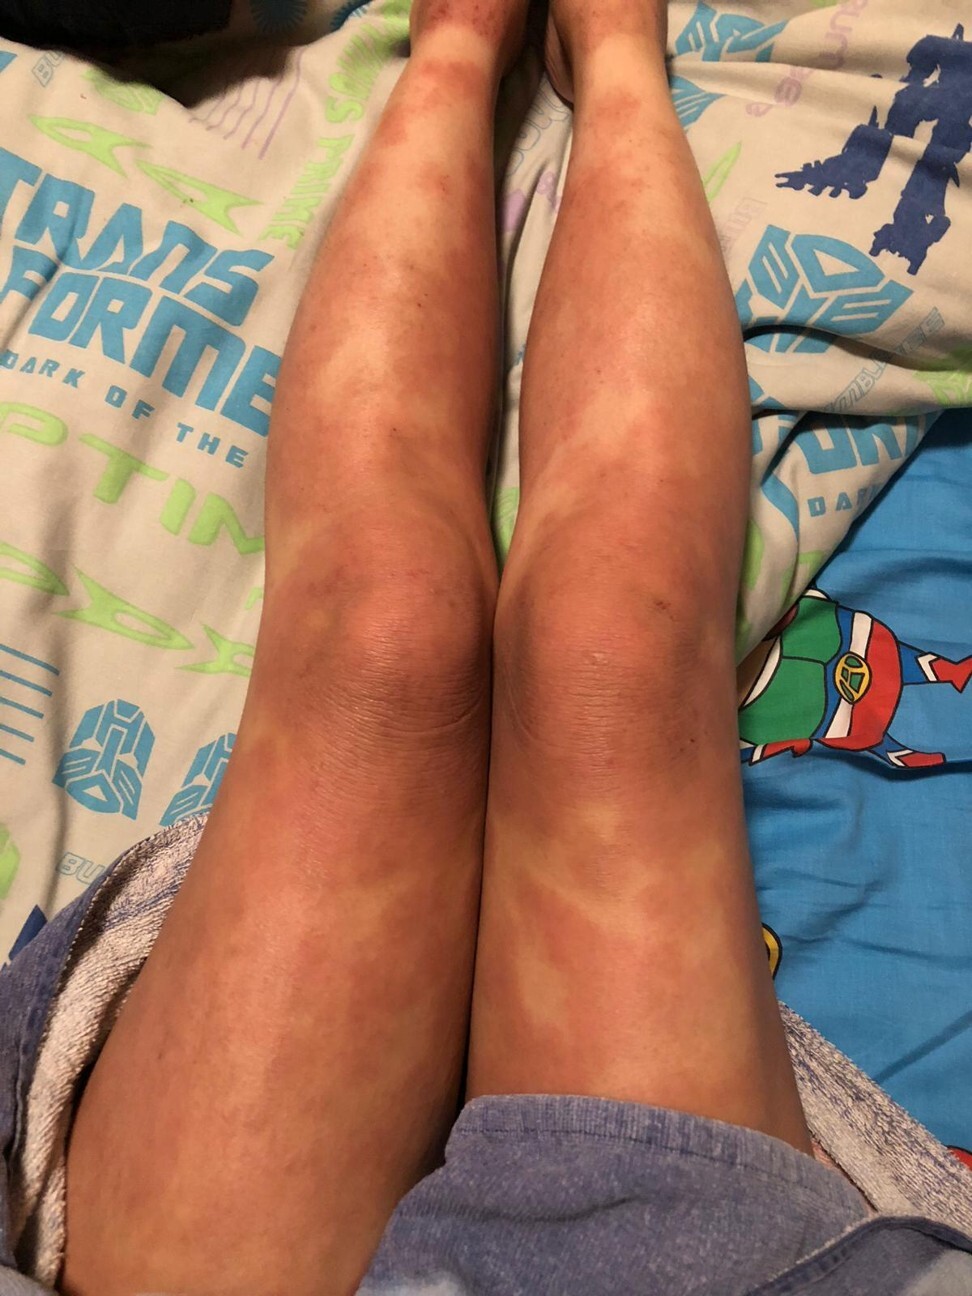 Kung documents an eczema outbreak on her legs.